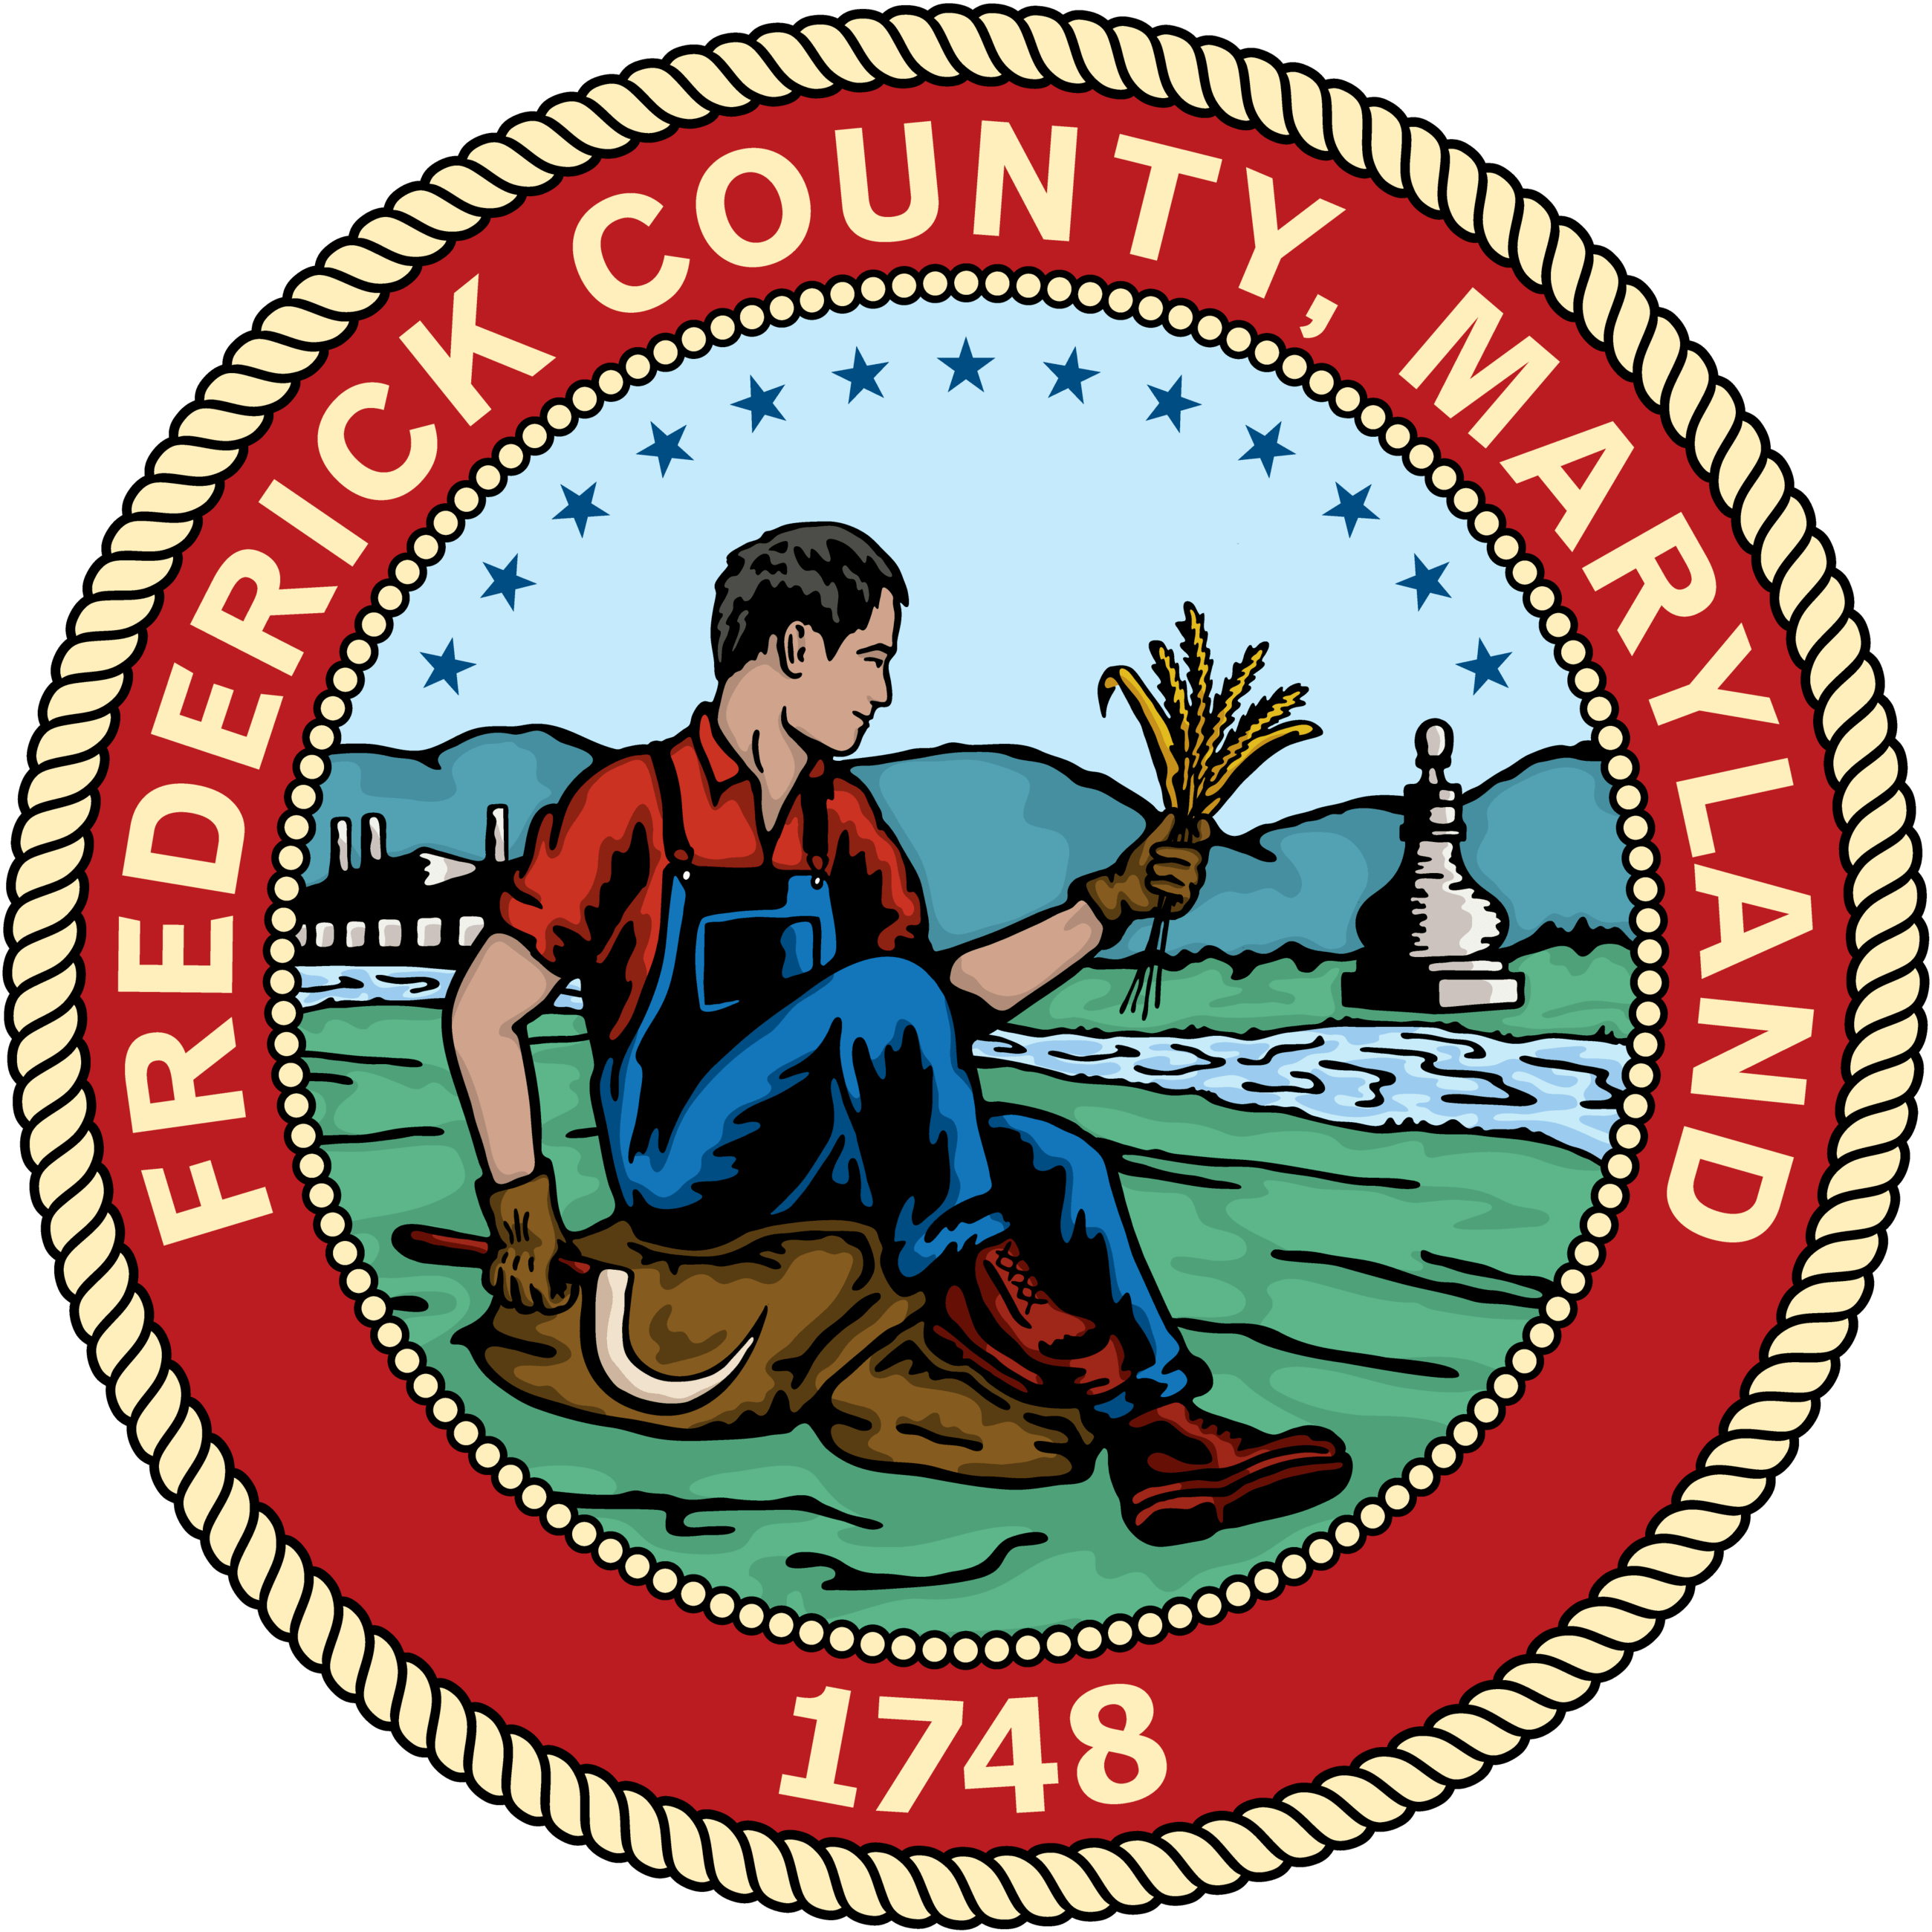 Ten Amendments Adopted To Frederick County Water & Sewerage Plan